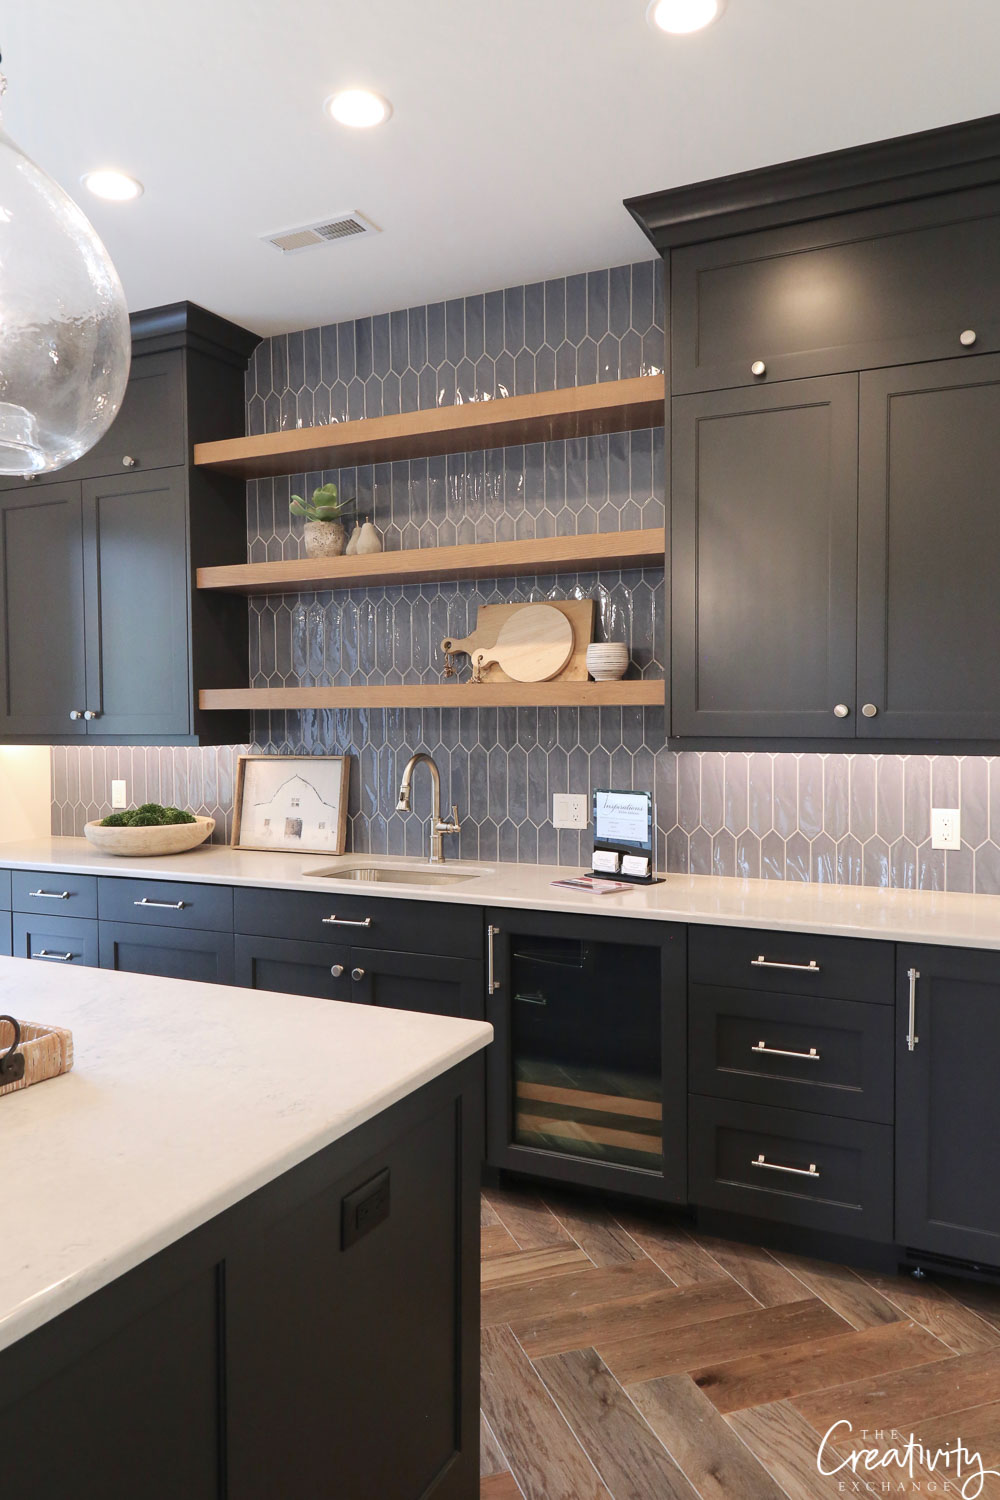 large contemporary kitchen with black shaker cabinets, chrome cabinet pulls and knobs, open shelving, white countertops and glossy blue backsplash